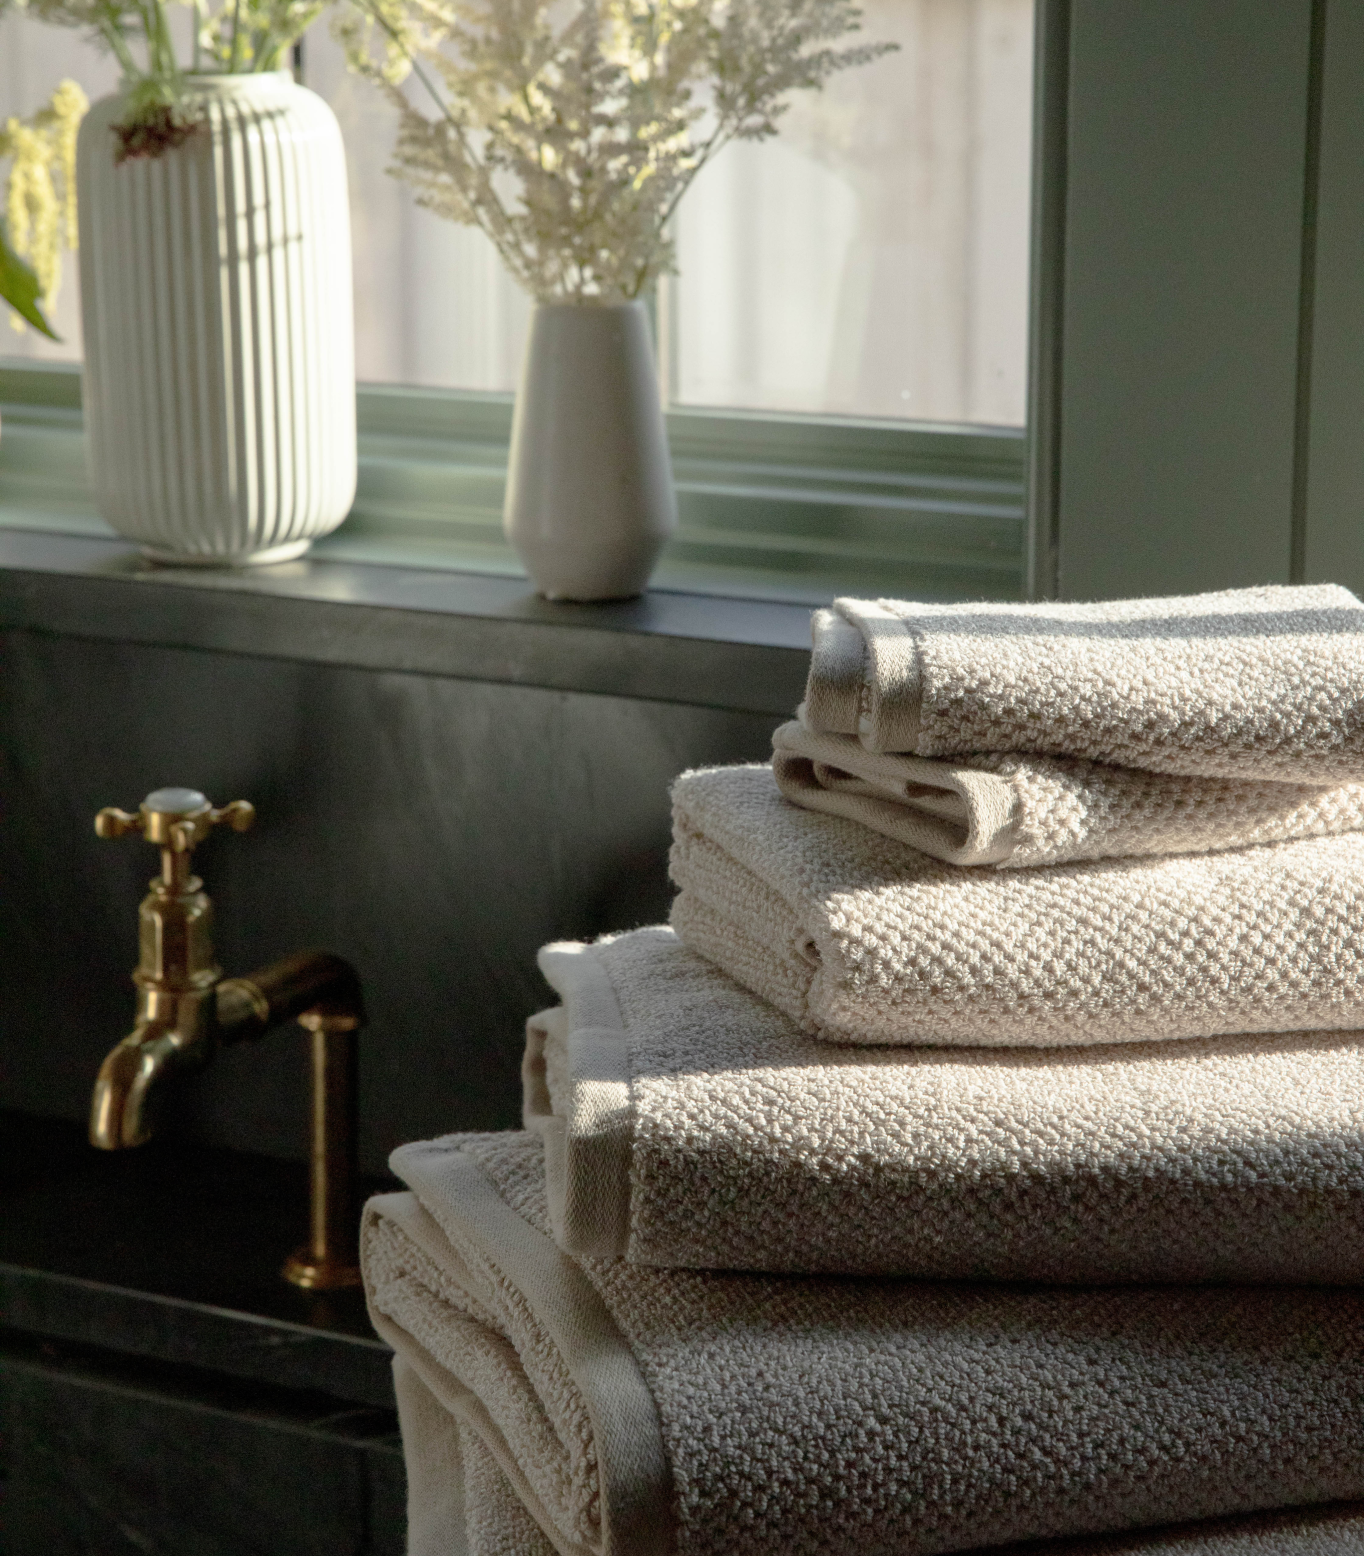 Nantucket Bath Towel bundle stacked on counter next to sink